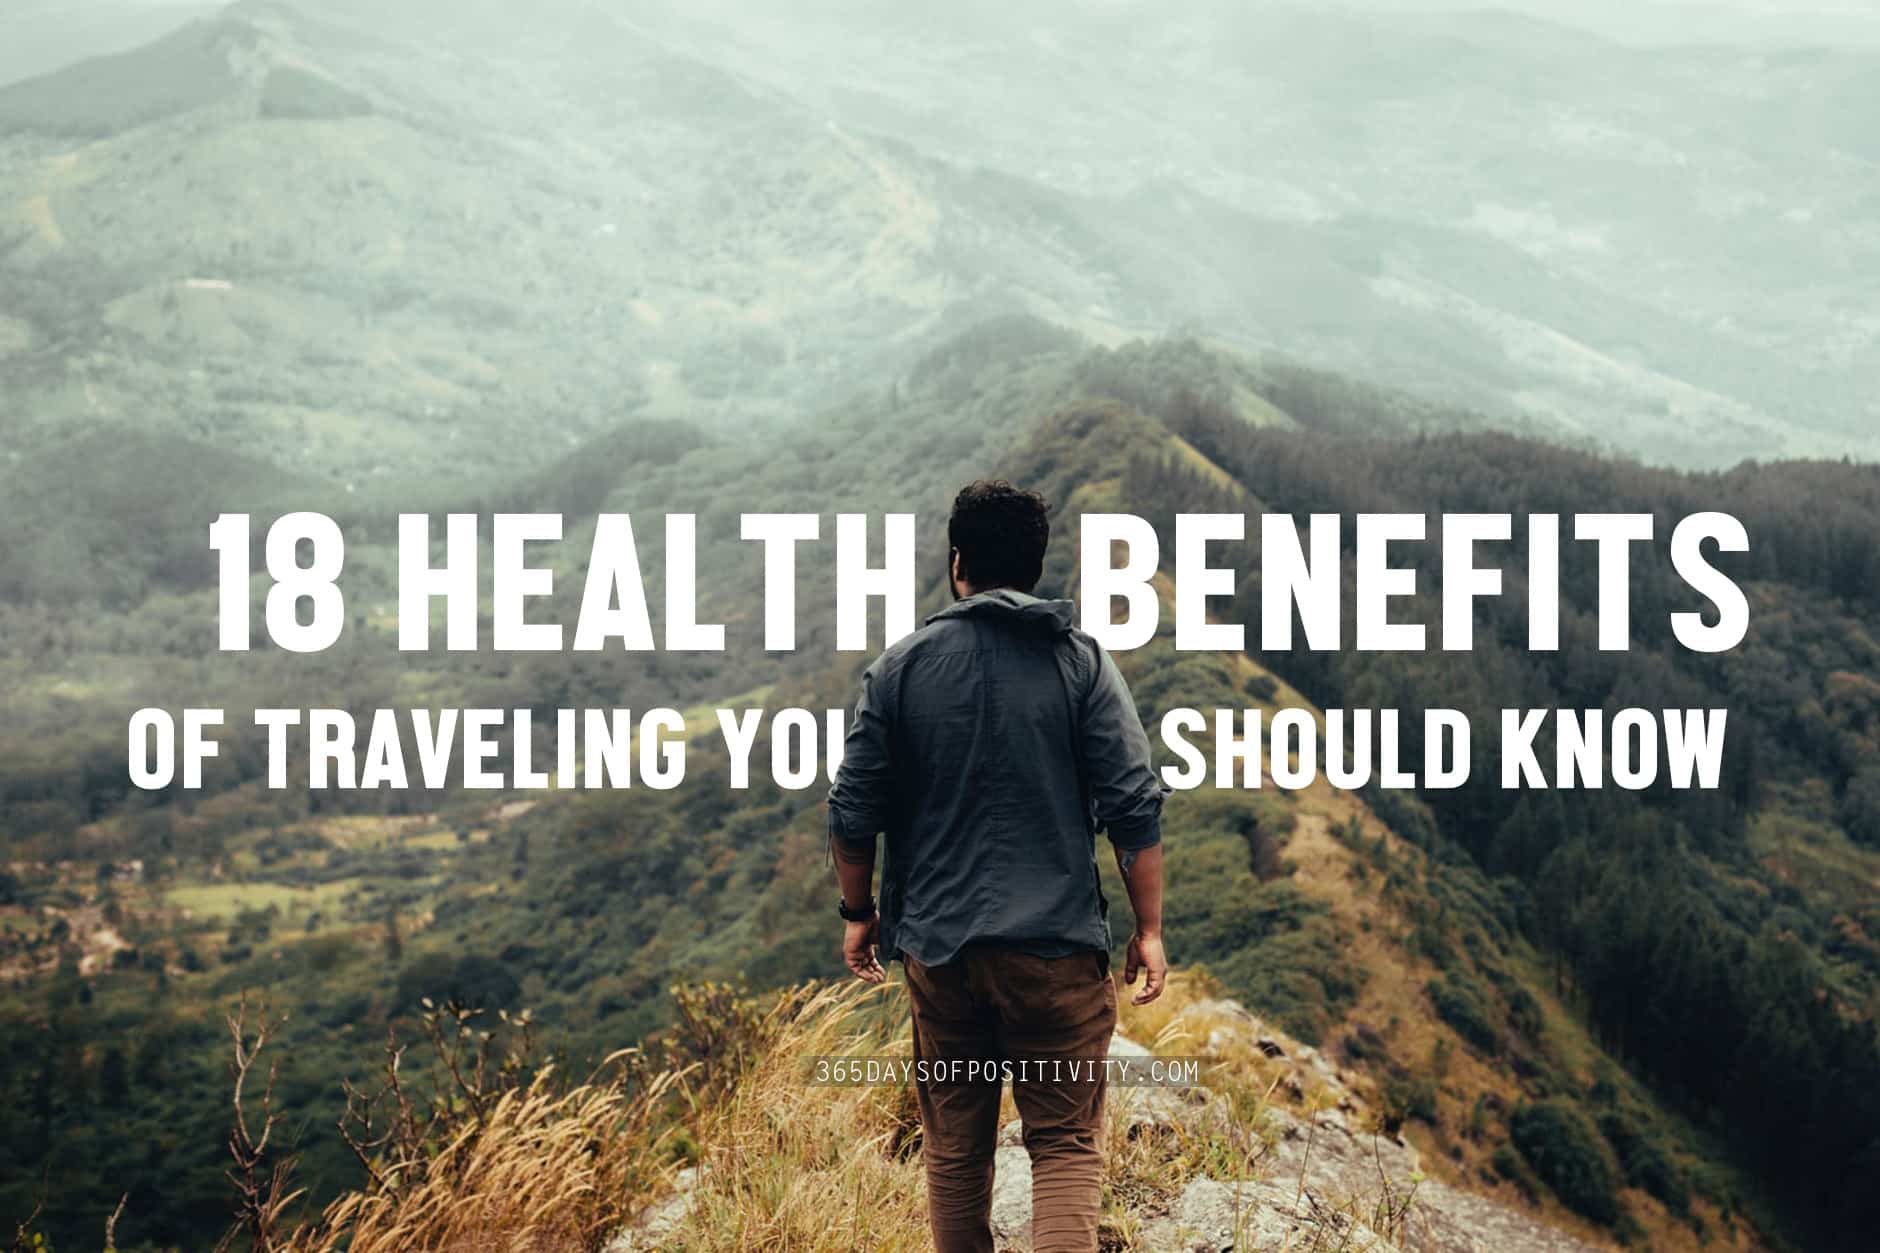  18 Health Benefits of Traveling You Should Know